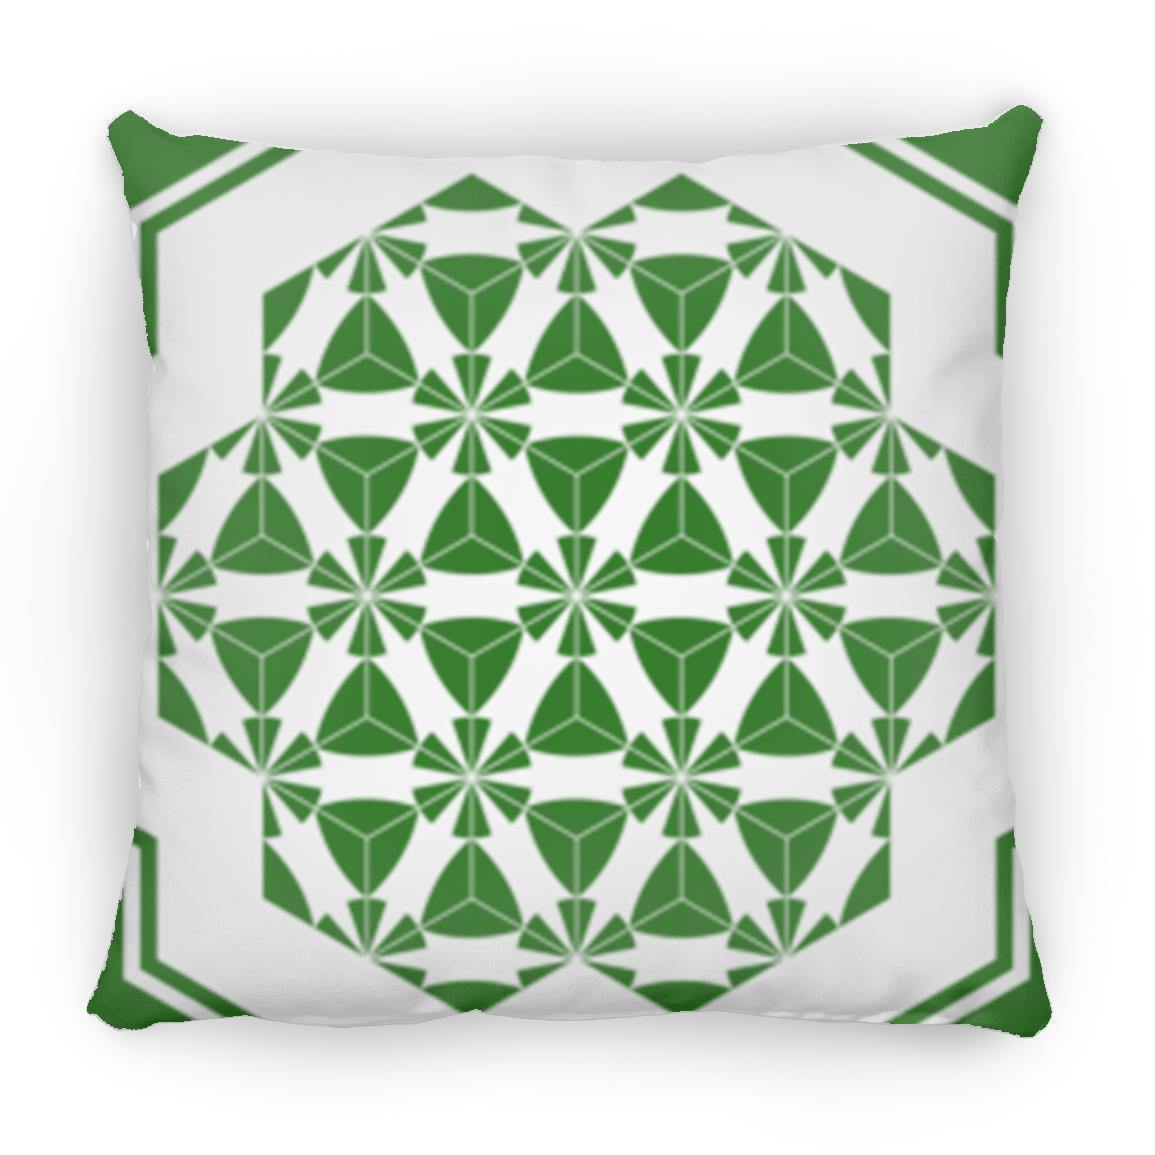 Crop Circle Pillow - West Overton - Shapes of Wisdom